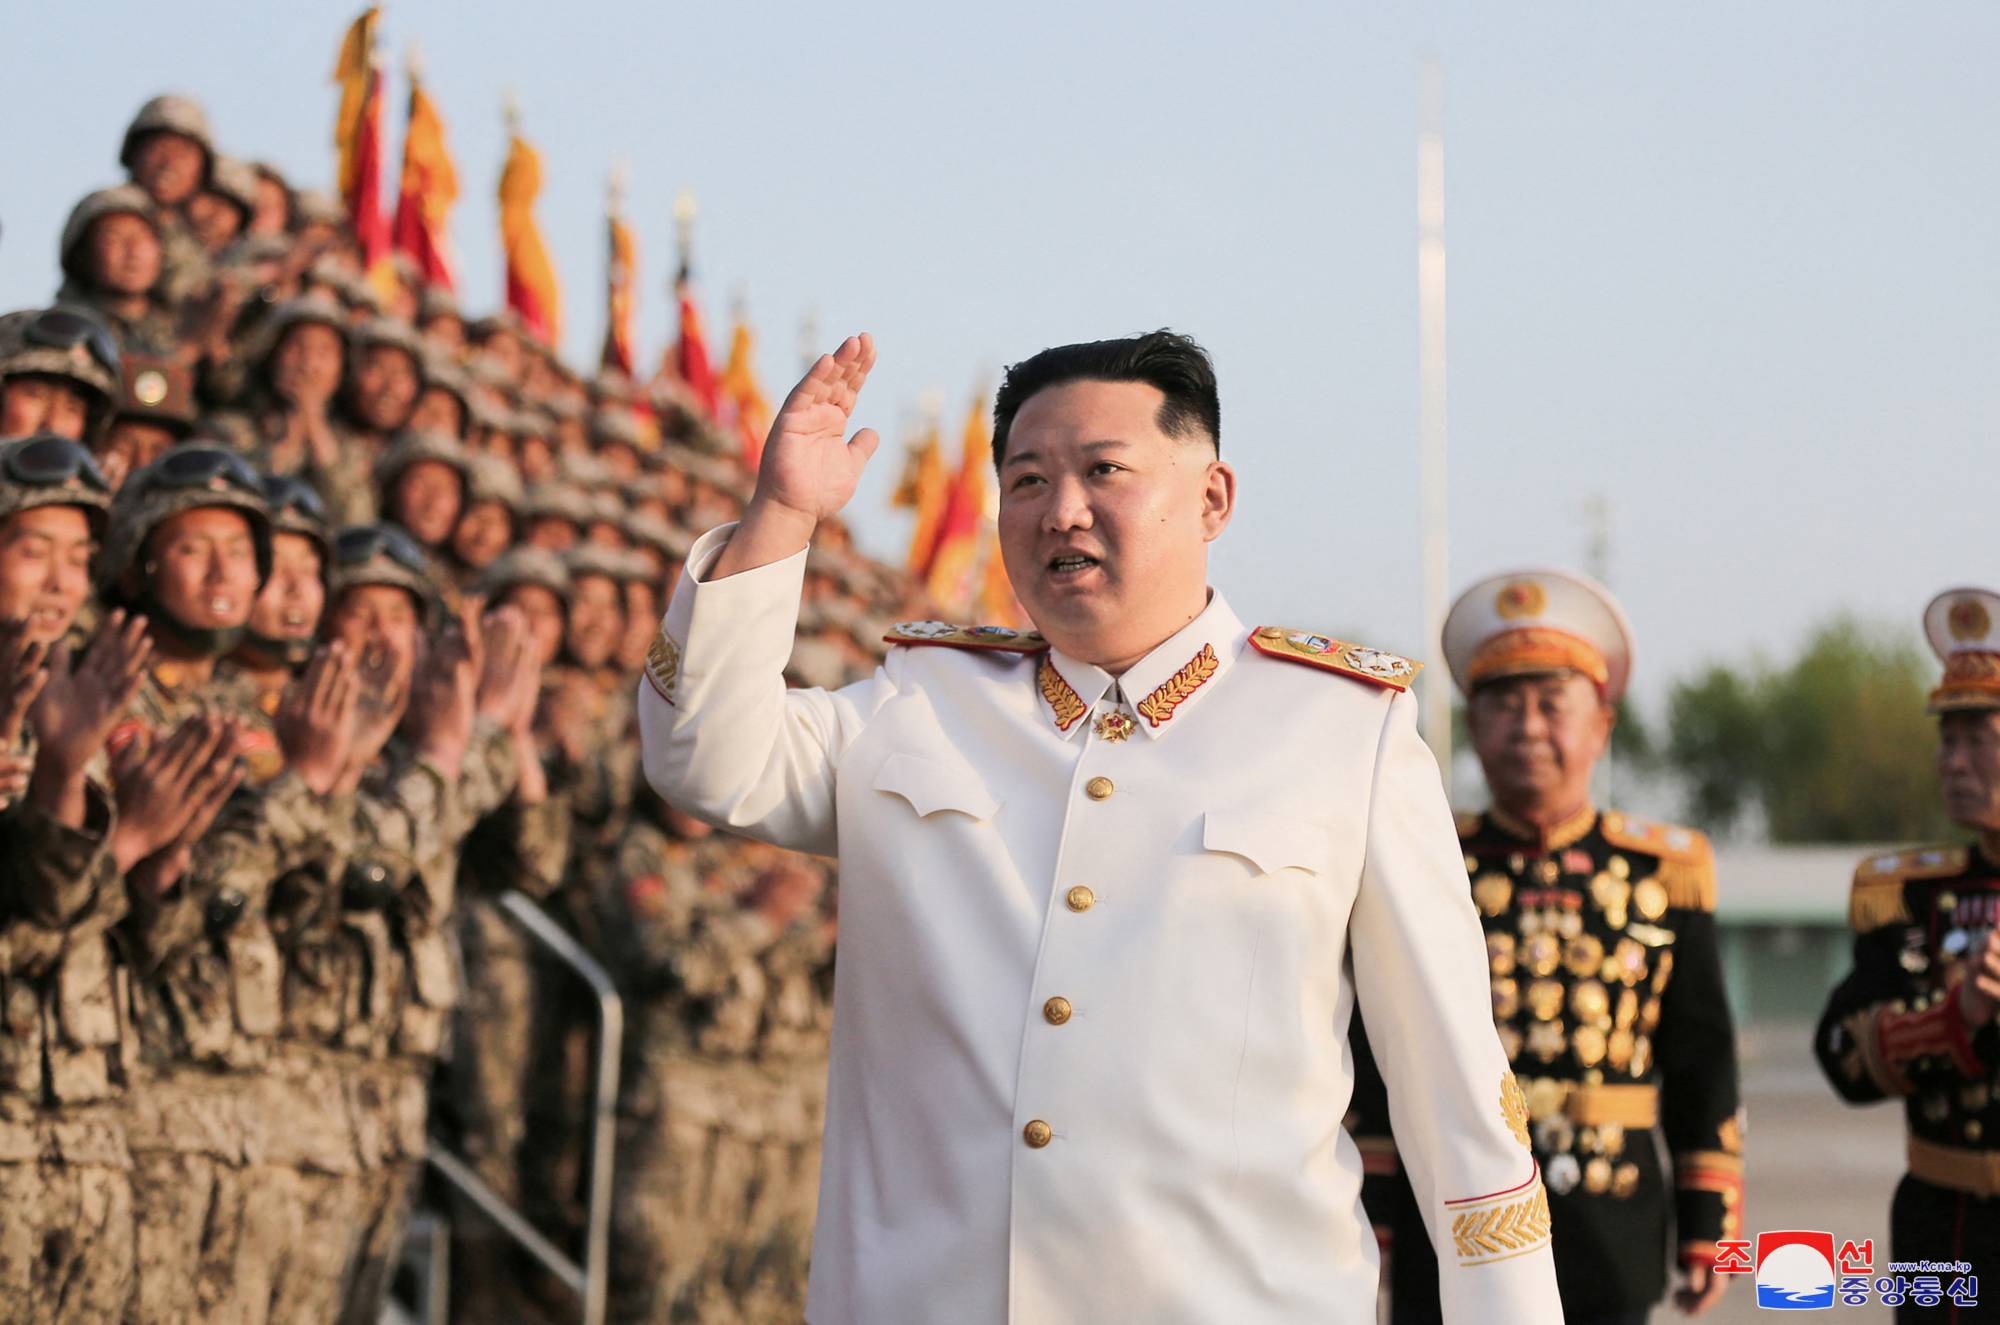 For most of its existence, North Korea's nuclear program has been geared toward defending the Kim regime from foreign attack. Recent developments indicate a new war-fighting capability focus. | KCNA / VIA REUTERS